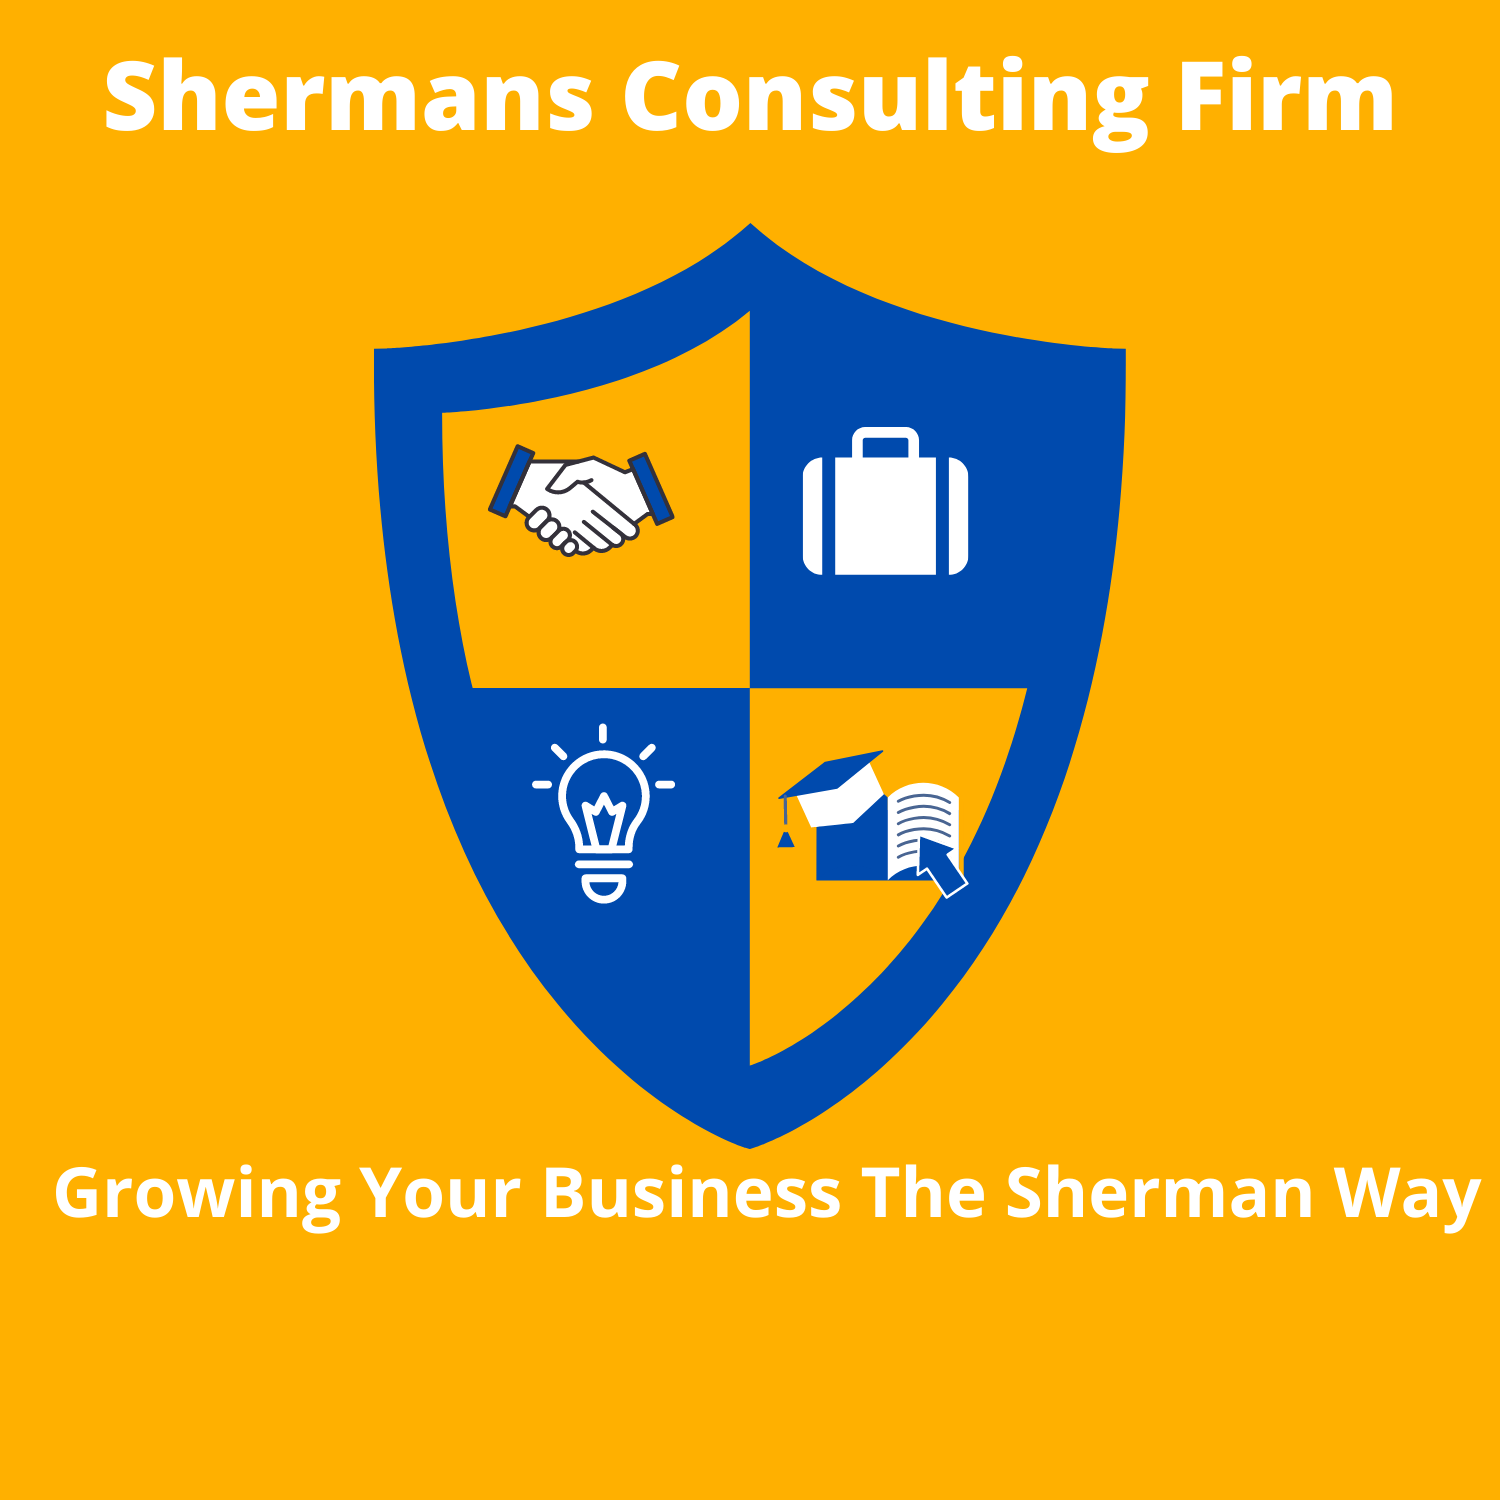 Shermans Consulting Firm